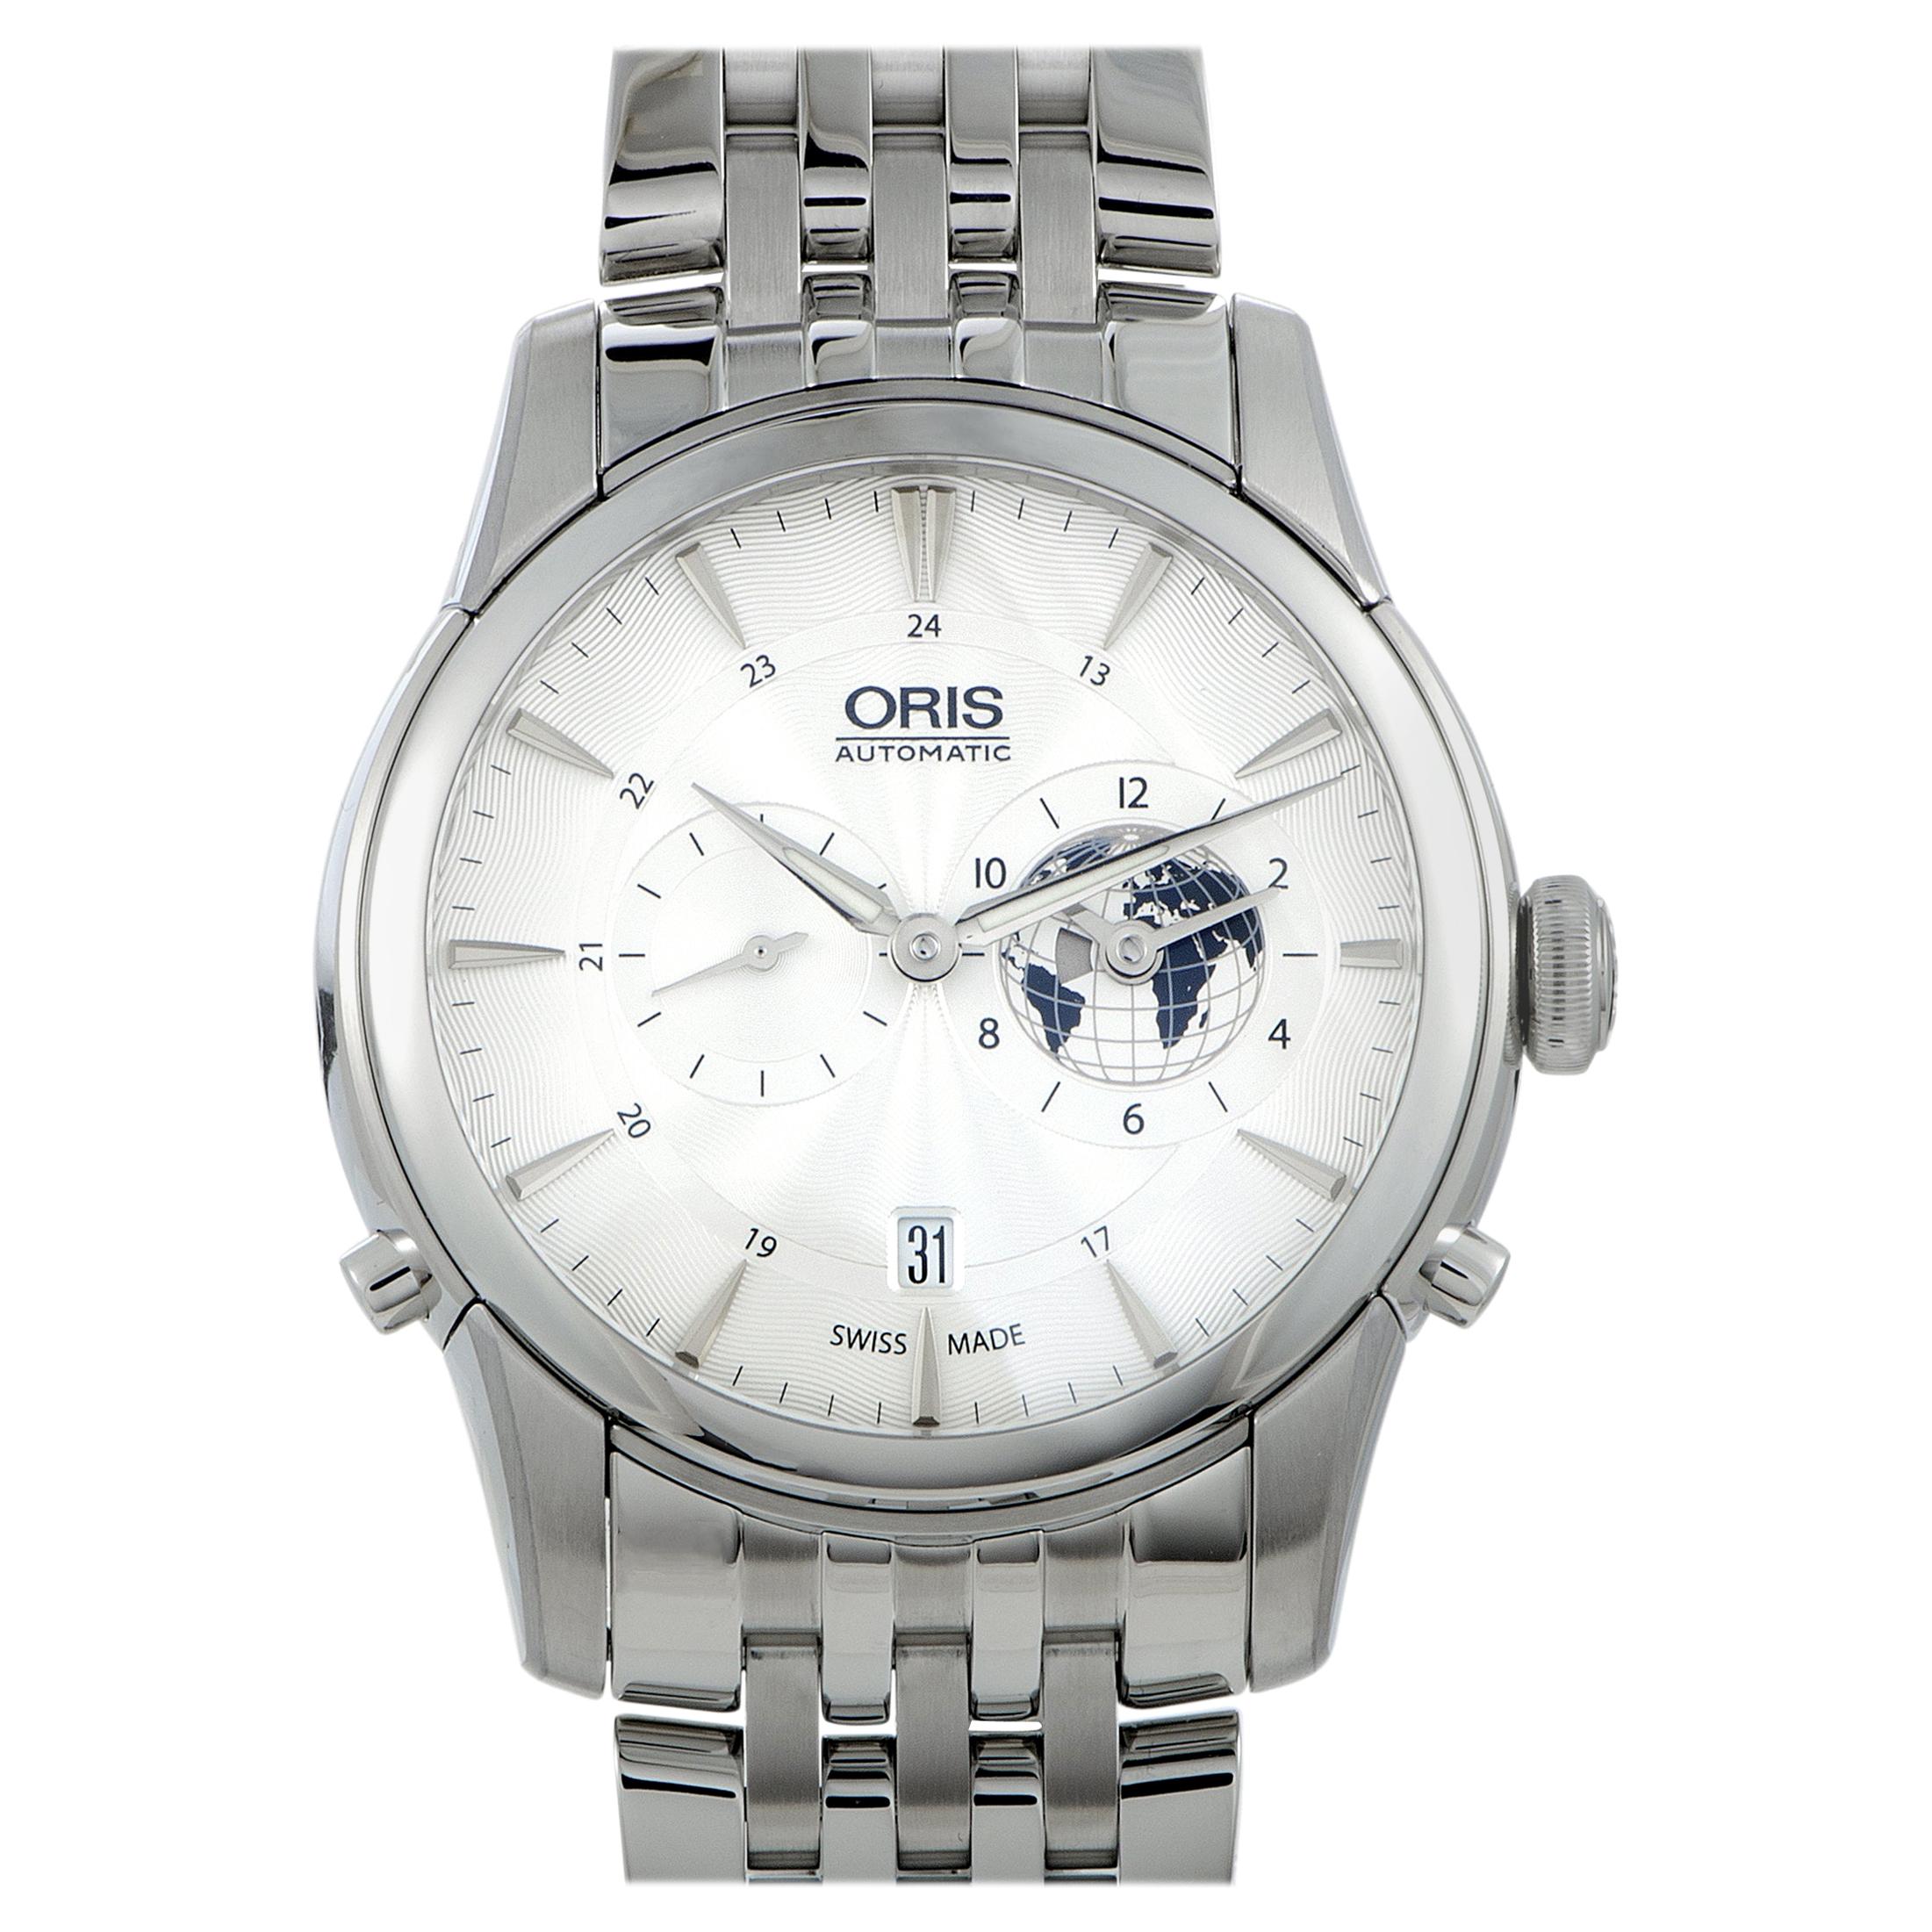 Oris Greenwich Mean Time Limited Edition Watch 01 6907690 4081-07 8 22 77